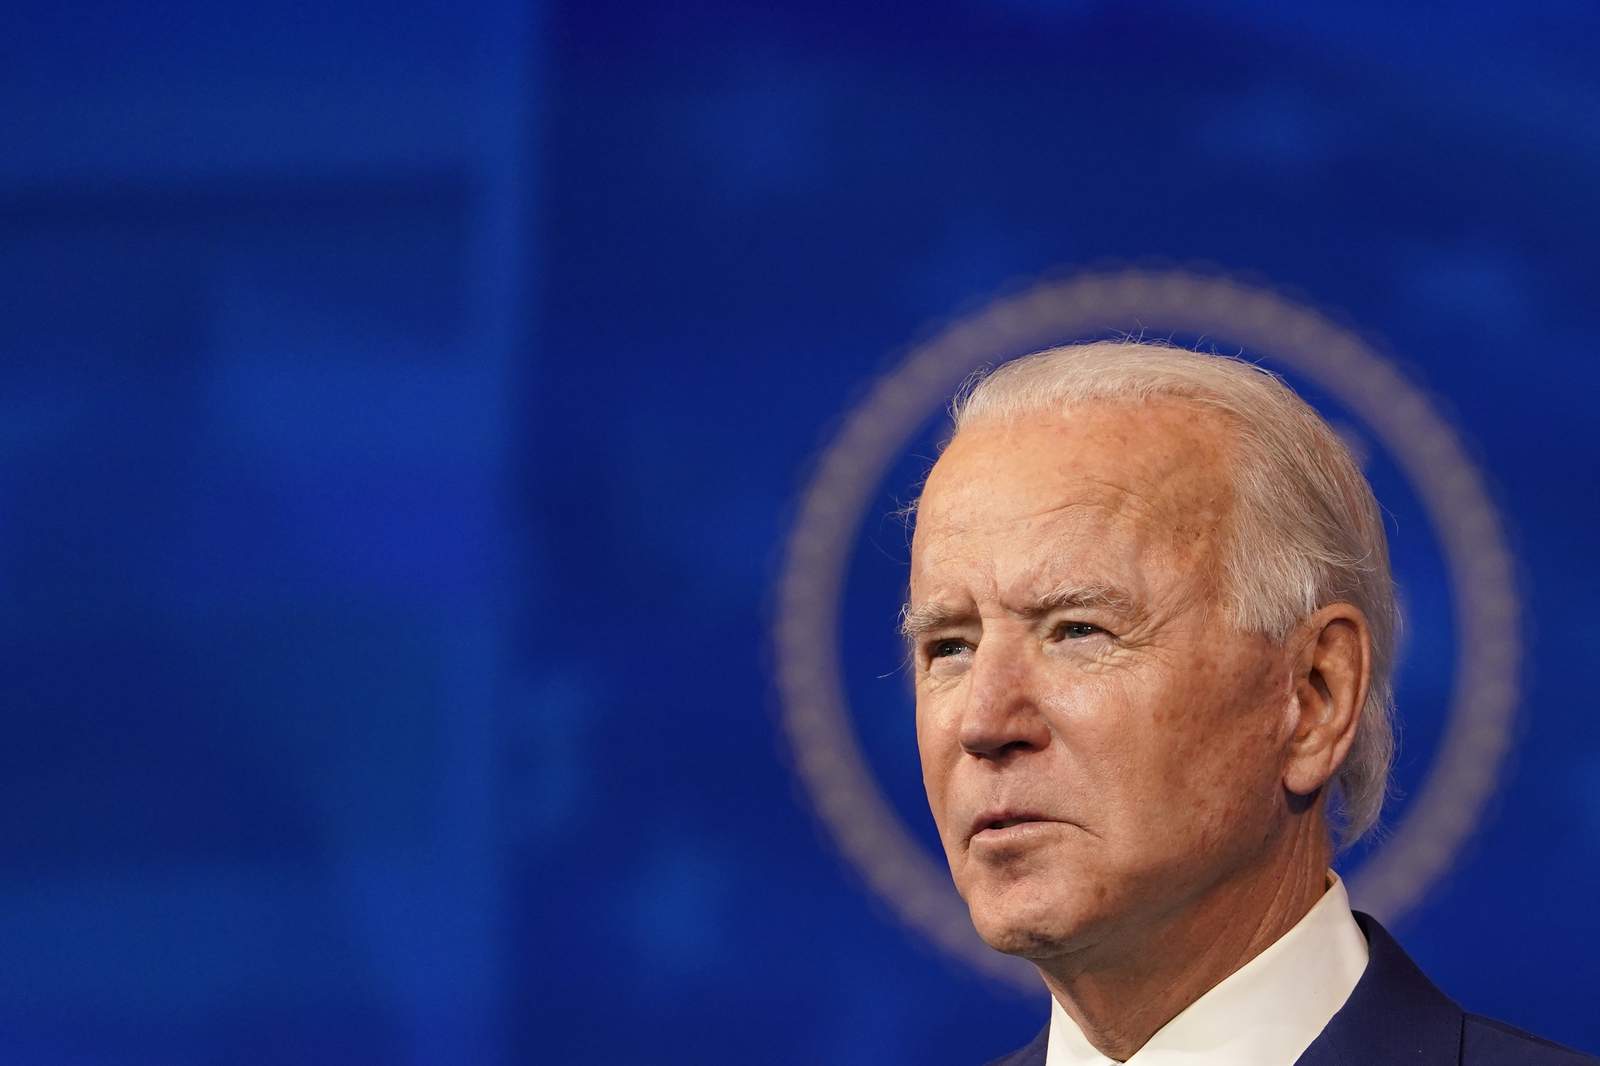 The Latest: Biden signals limit on executive authority use